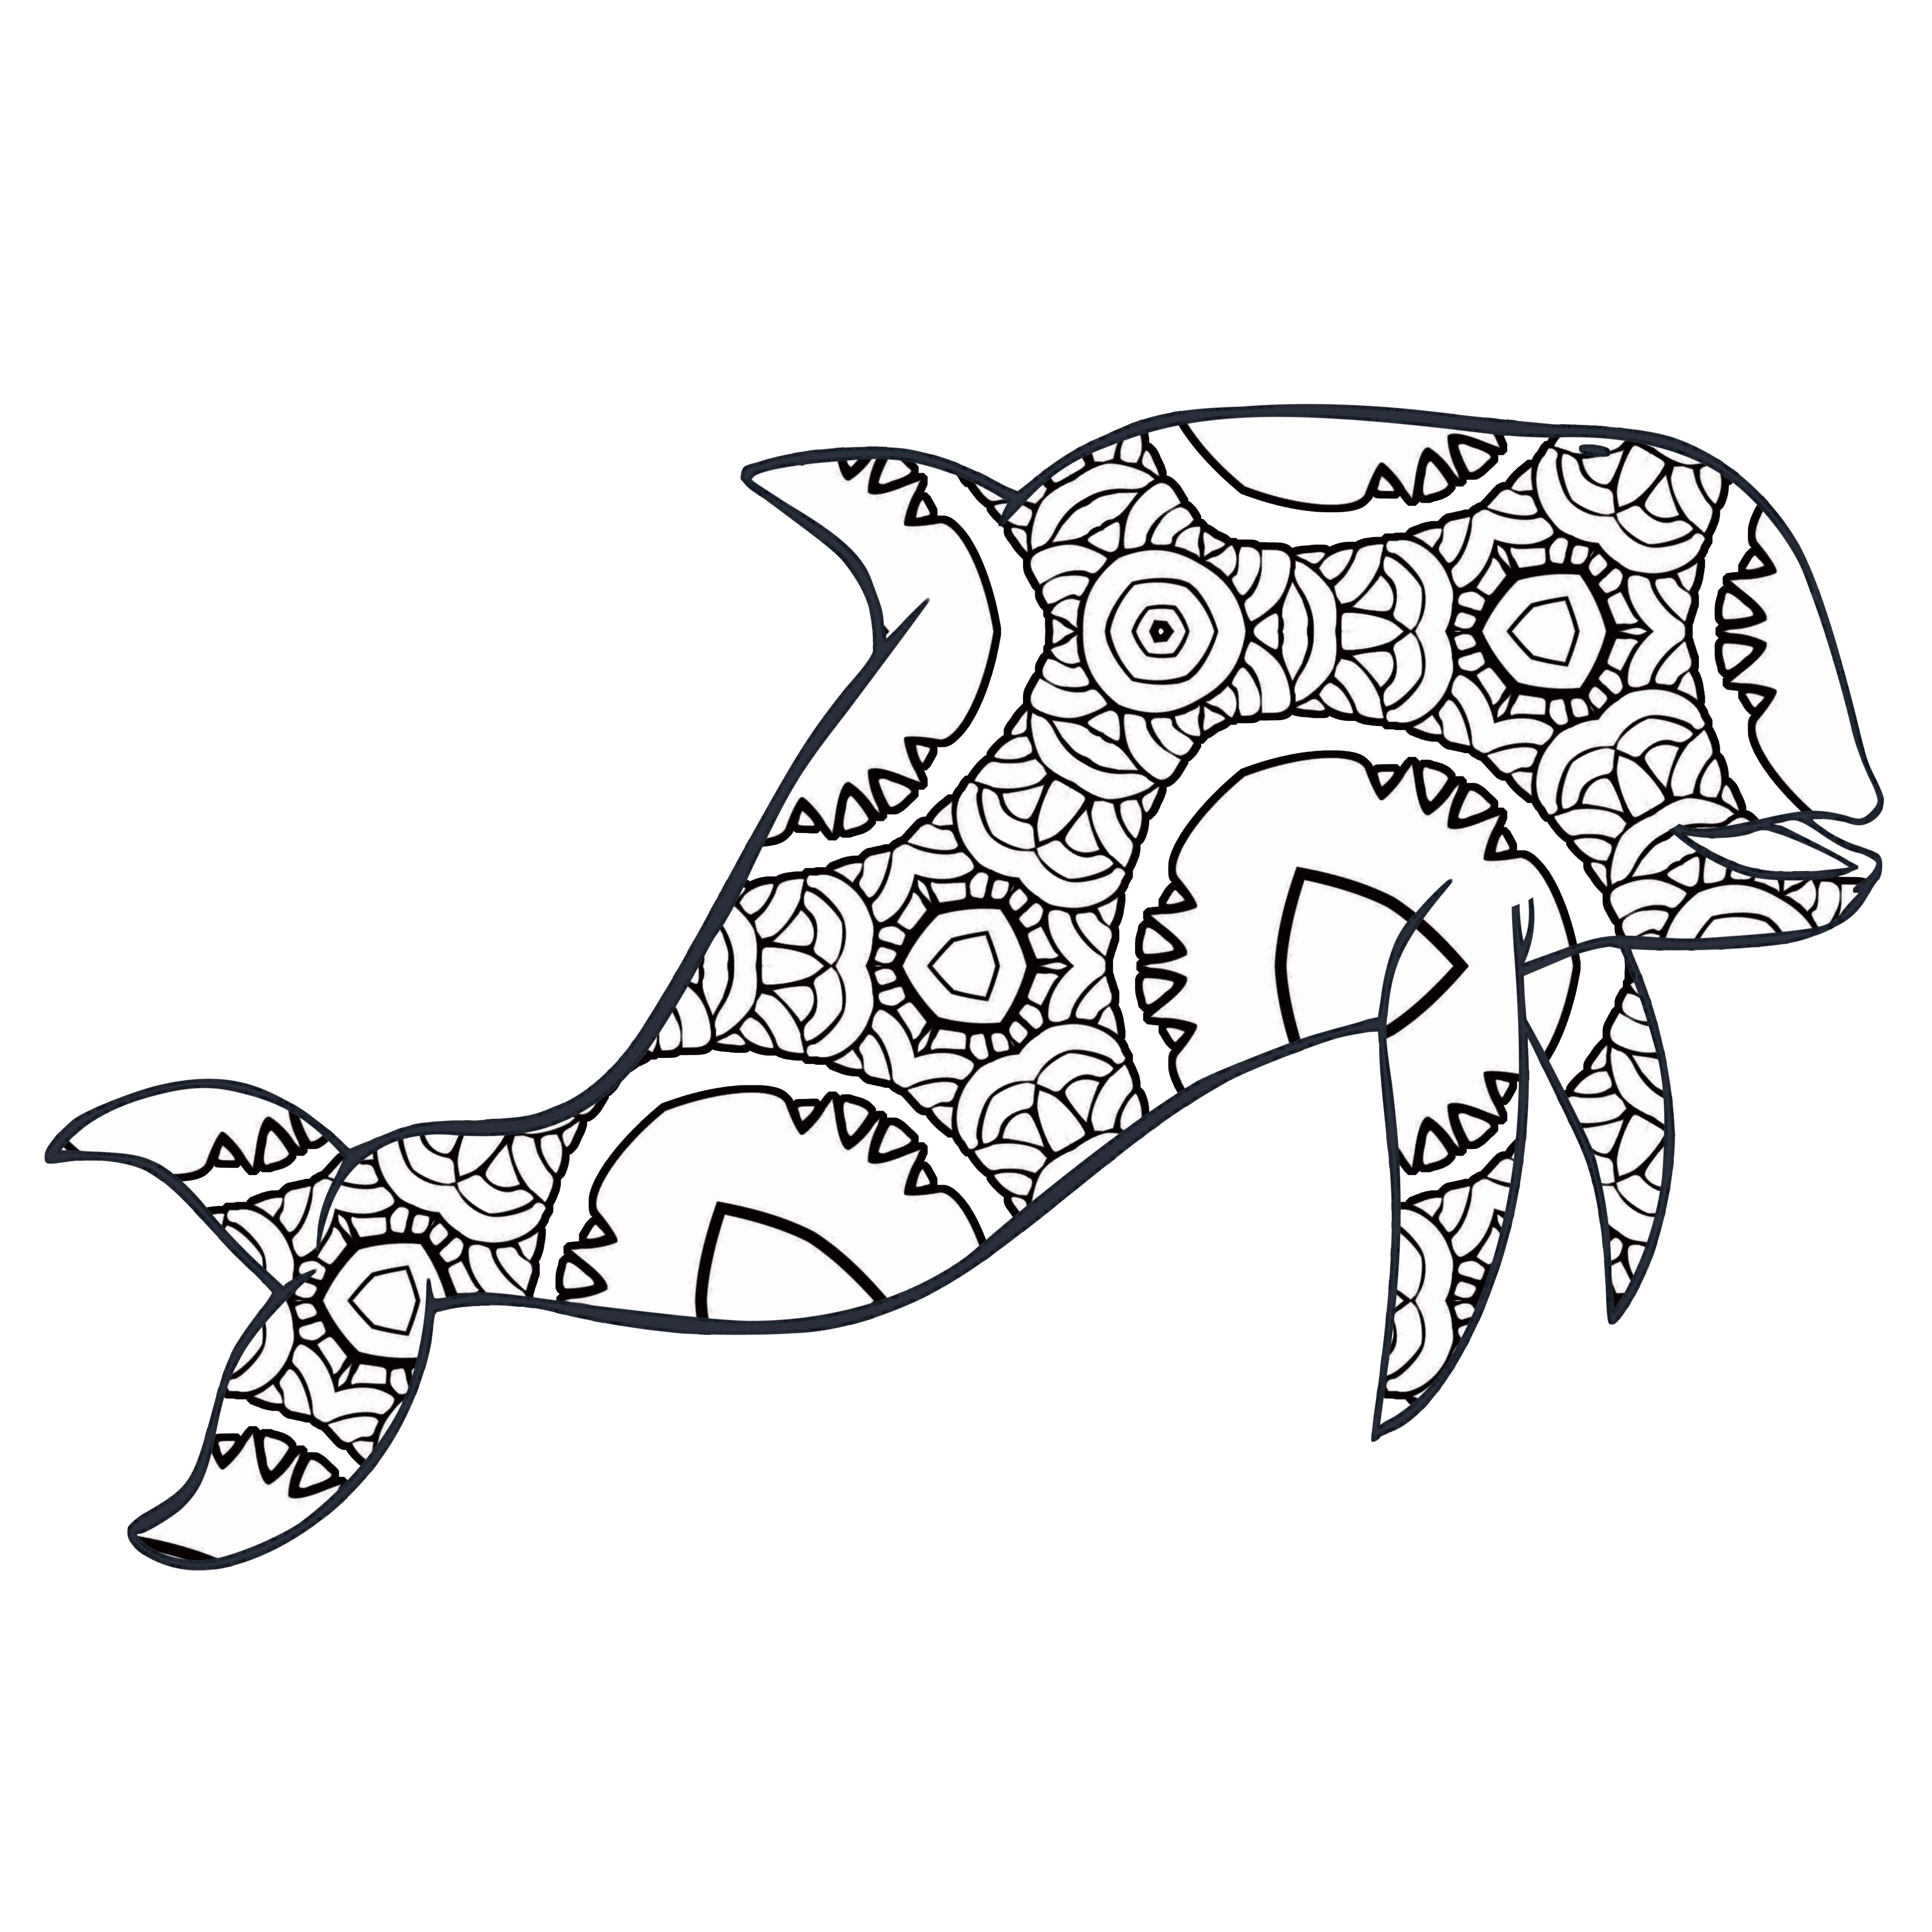 30 Free Printable Geometric Animal Coloring Pages | The Cottage Market